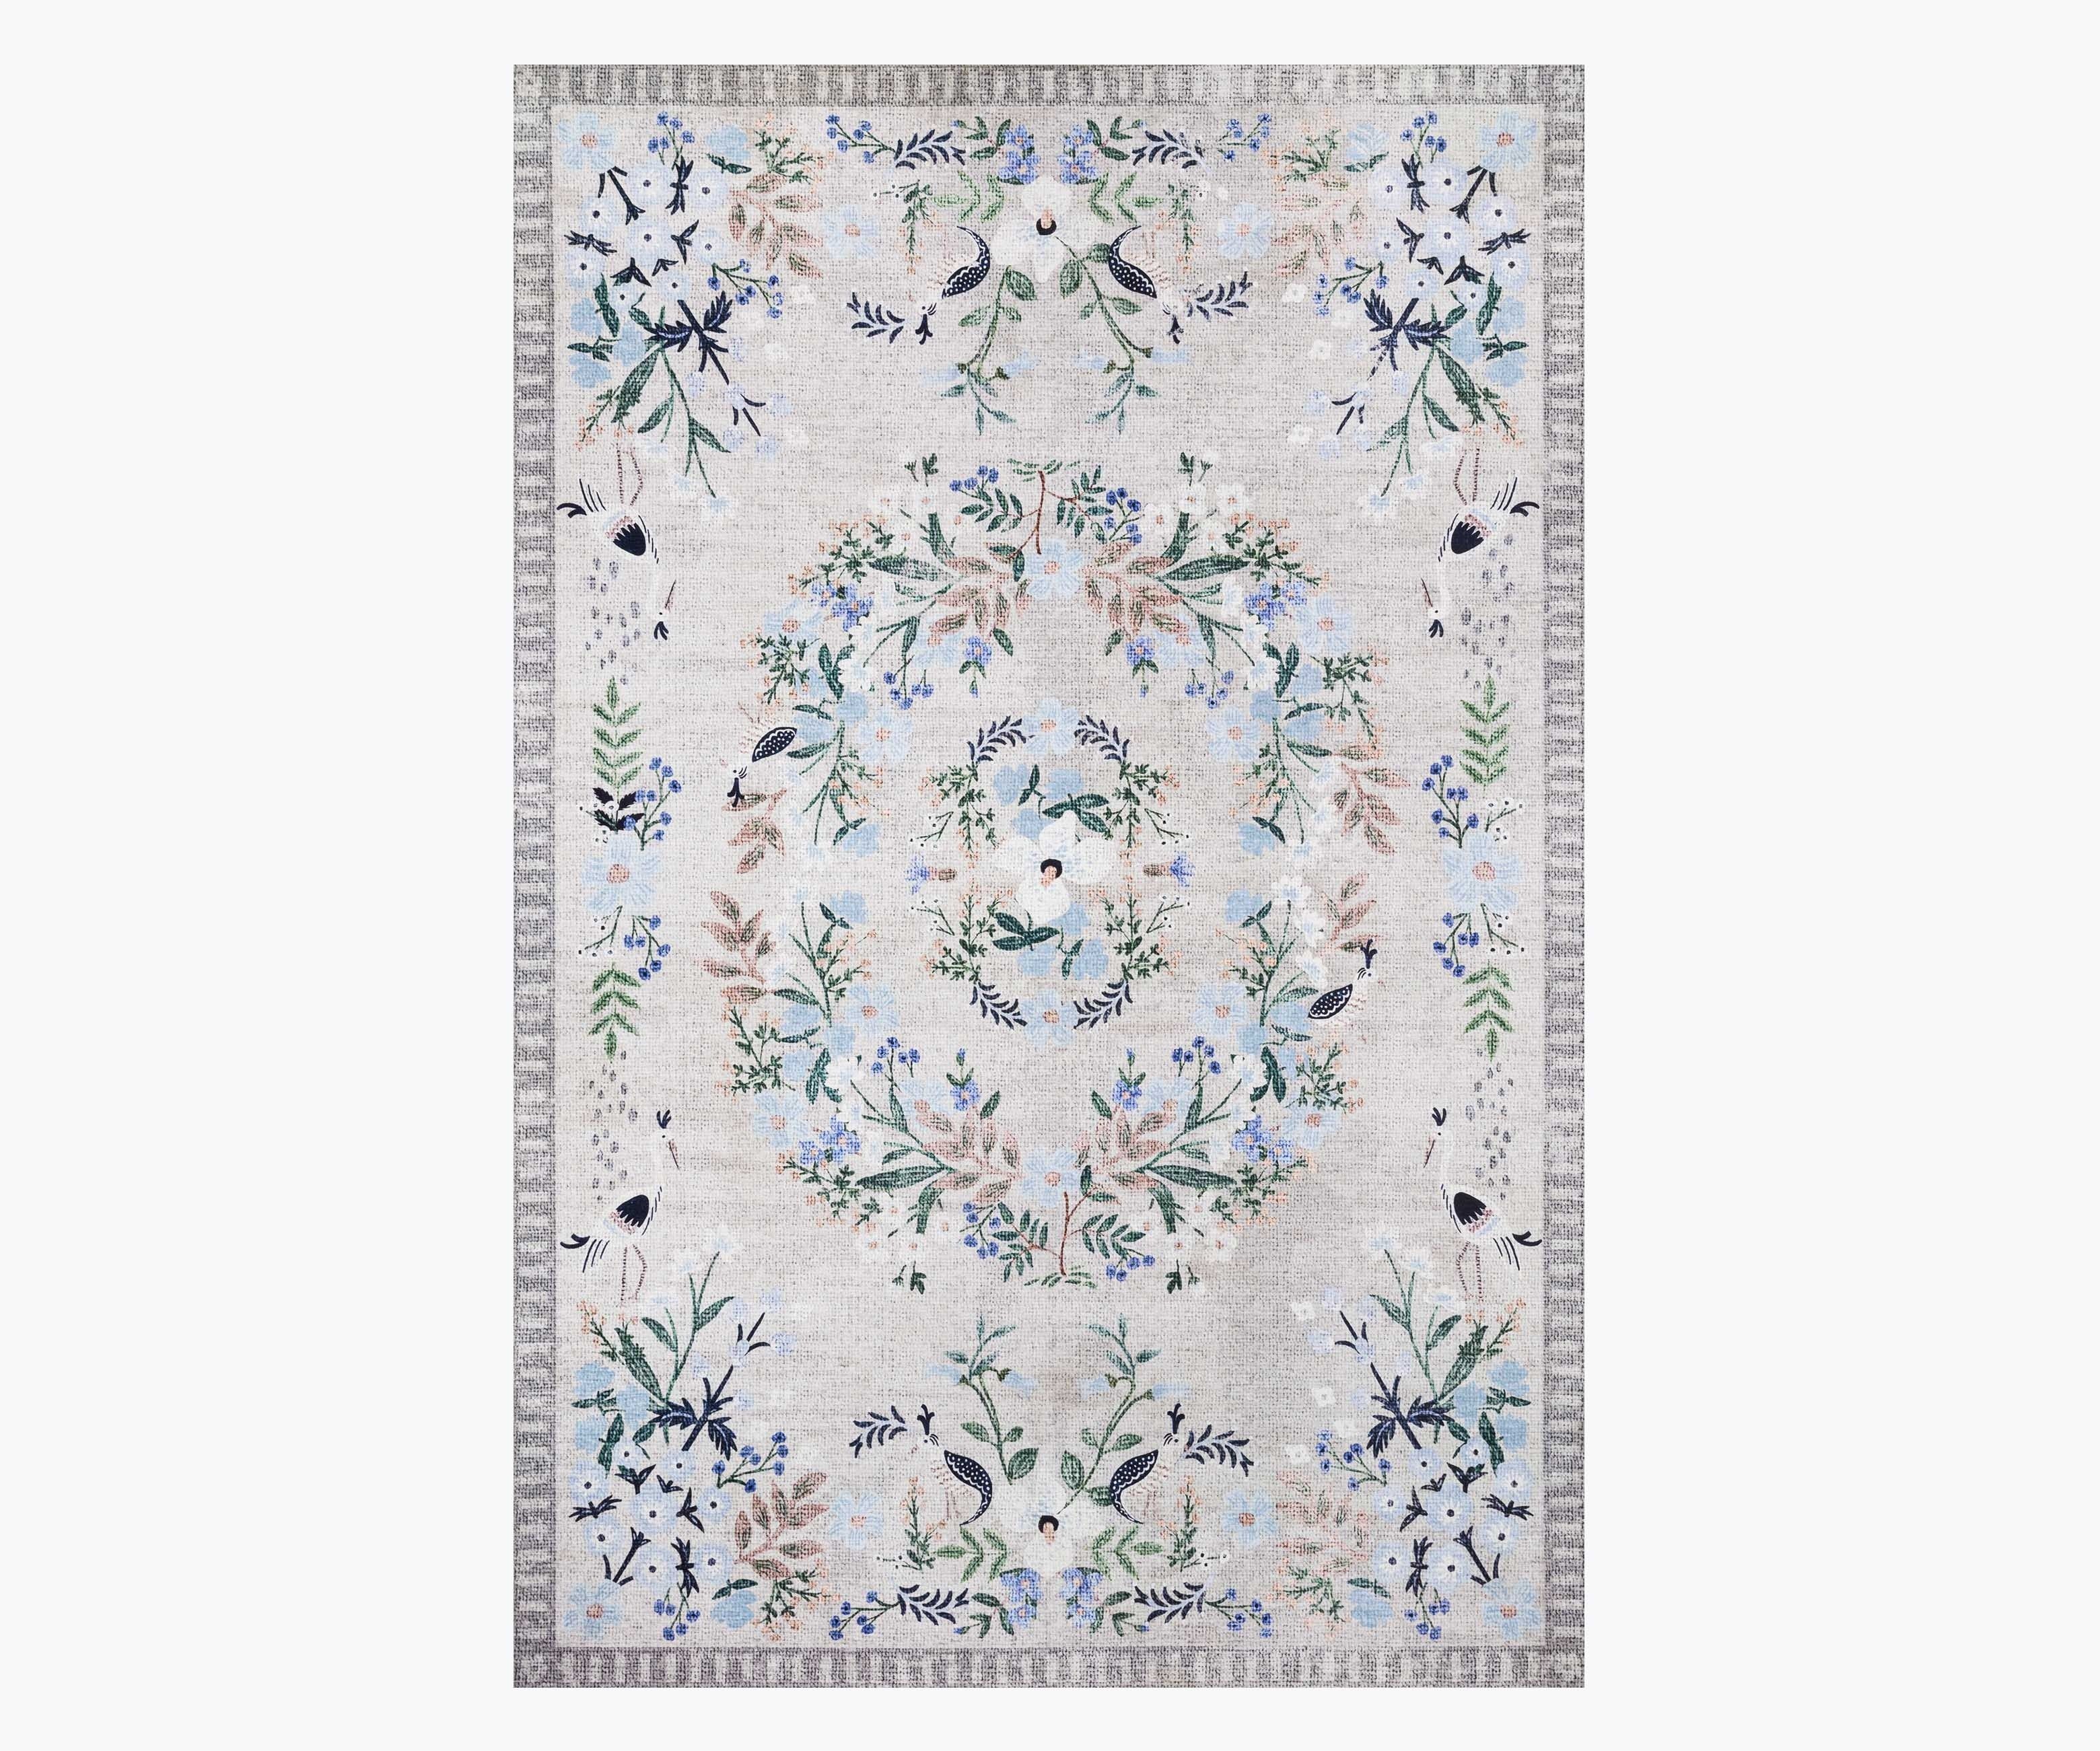 Luxembourg Stone Printed Rug | Rifle Paper Co.